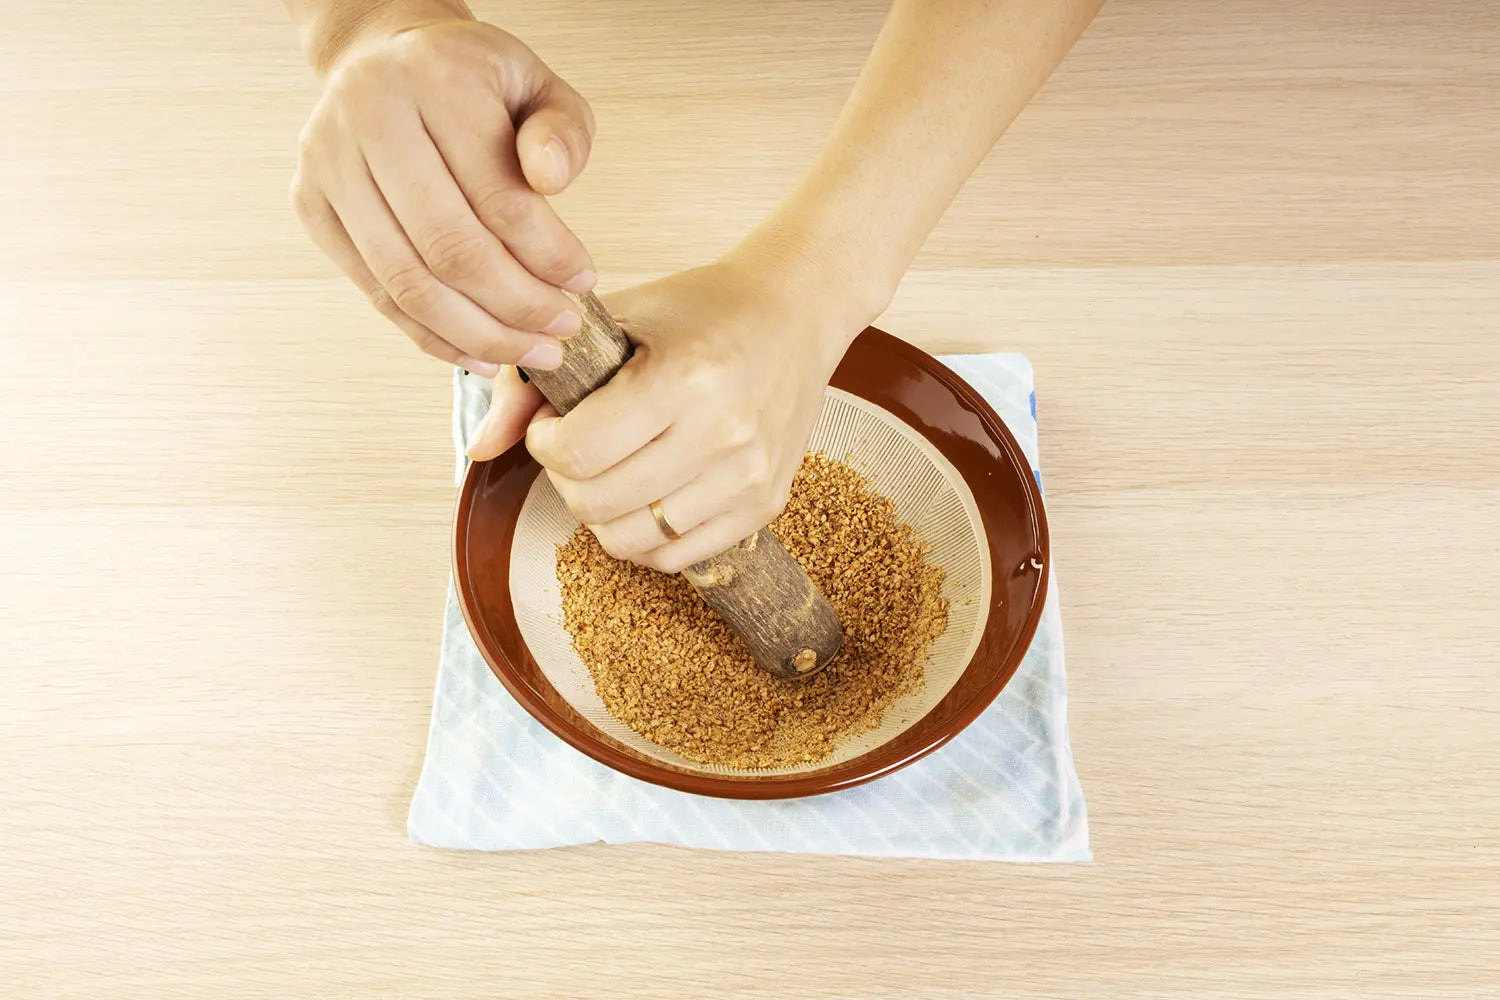 Female hands gripping the pestle